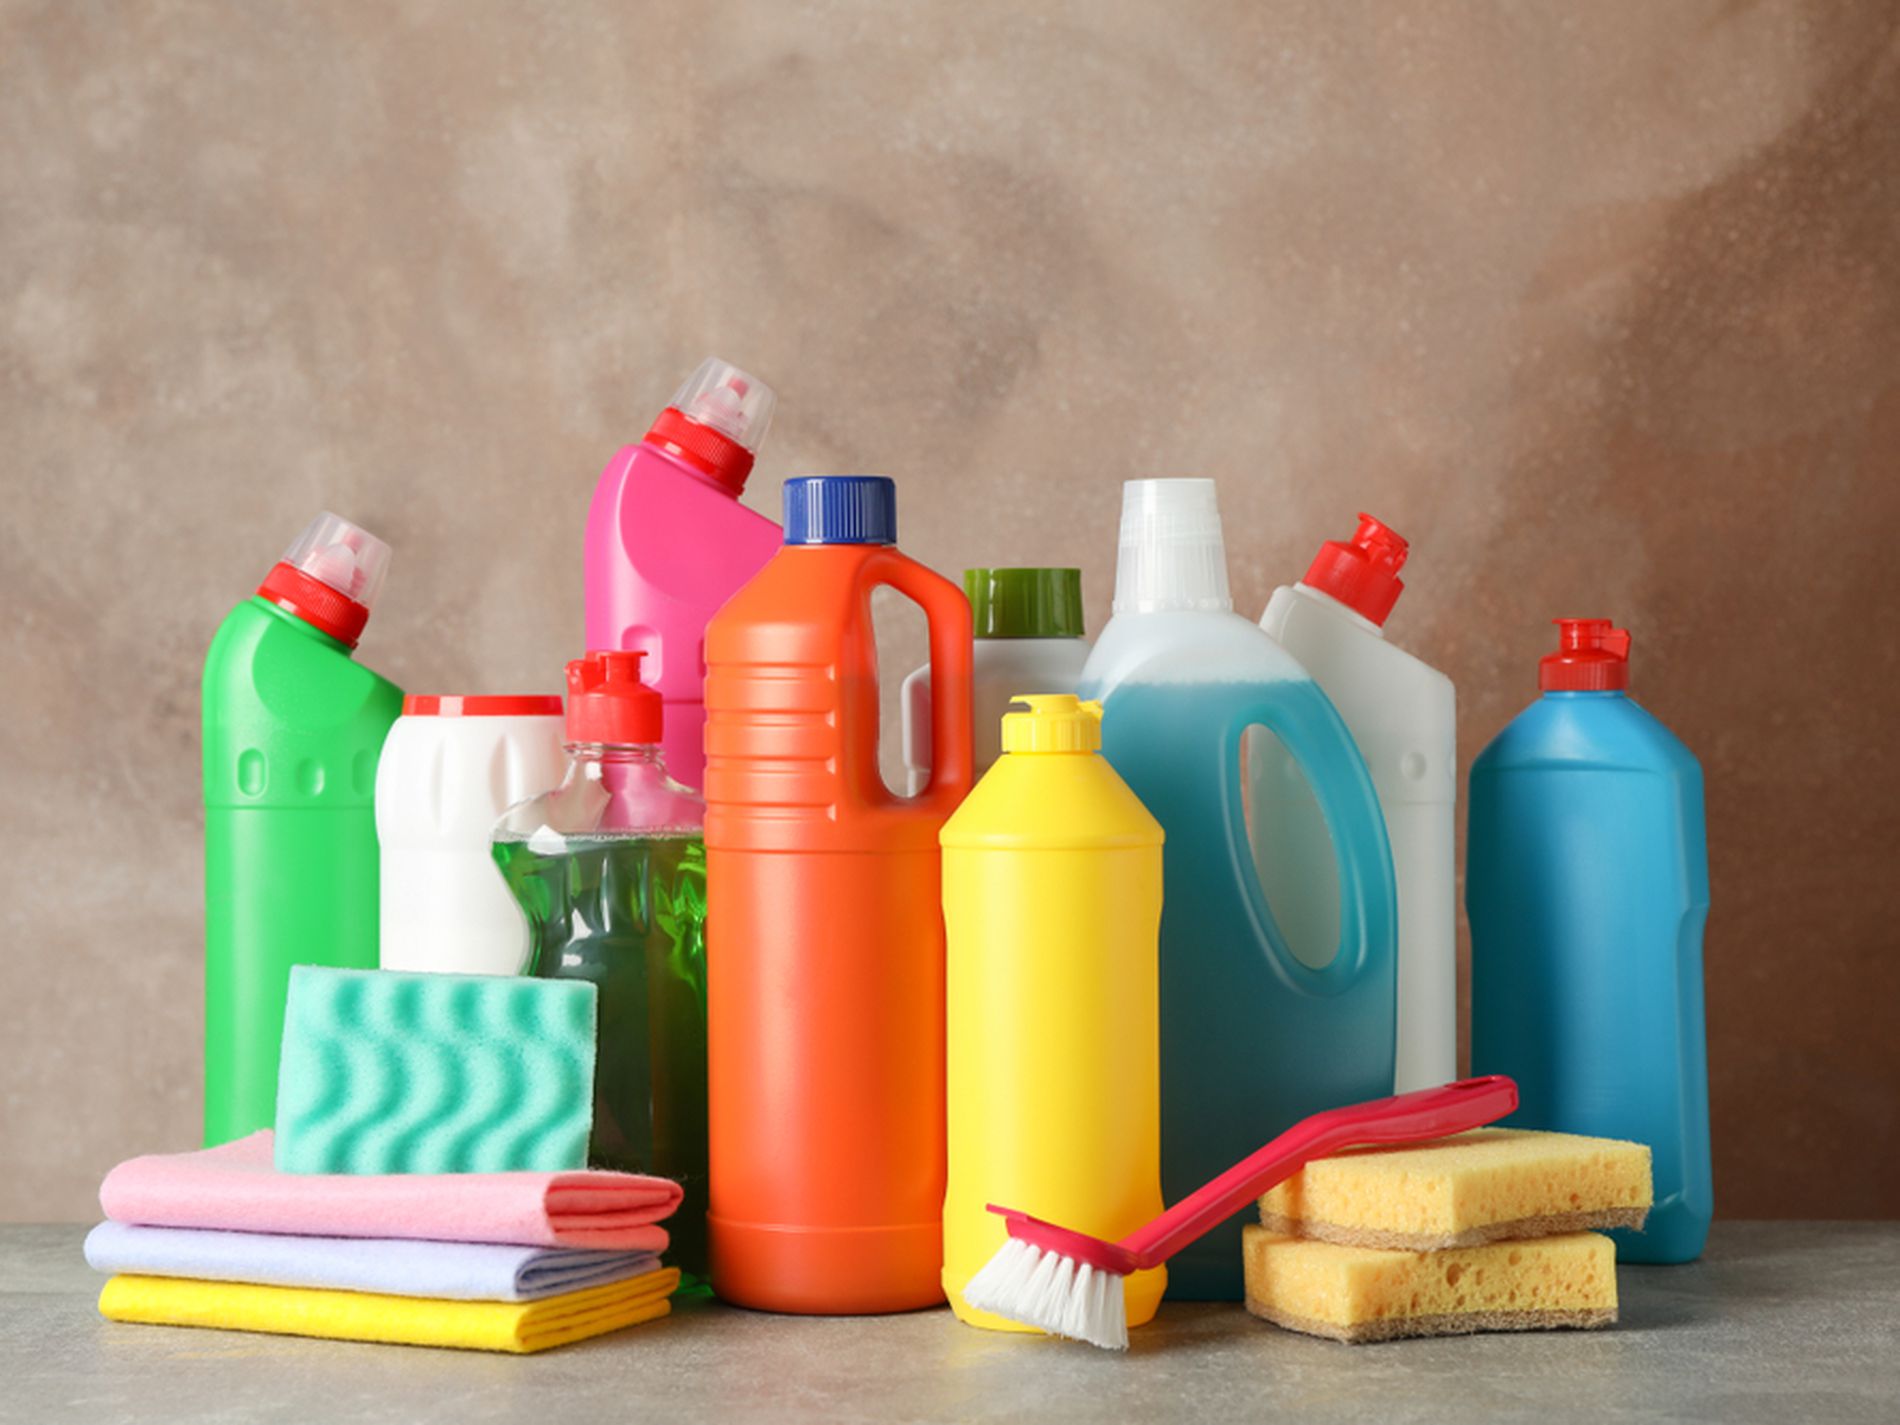 Online Wholesale Cleaning Supplies Business for Sale